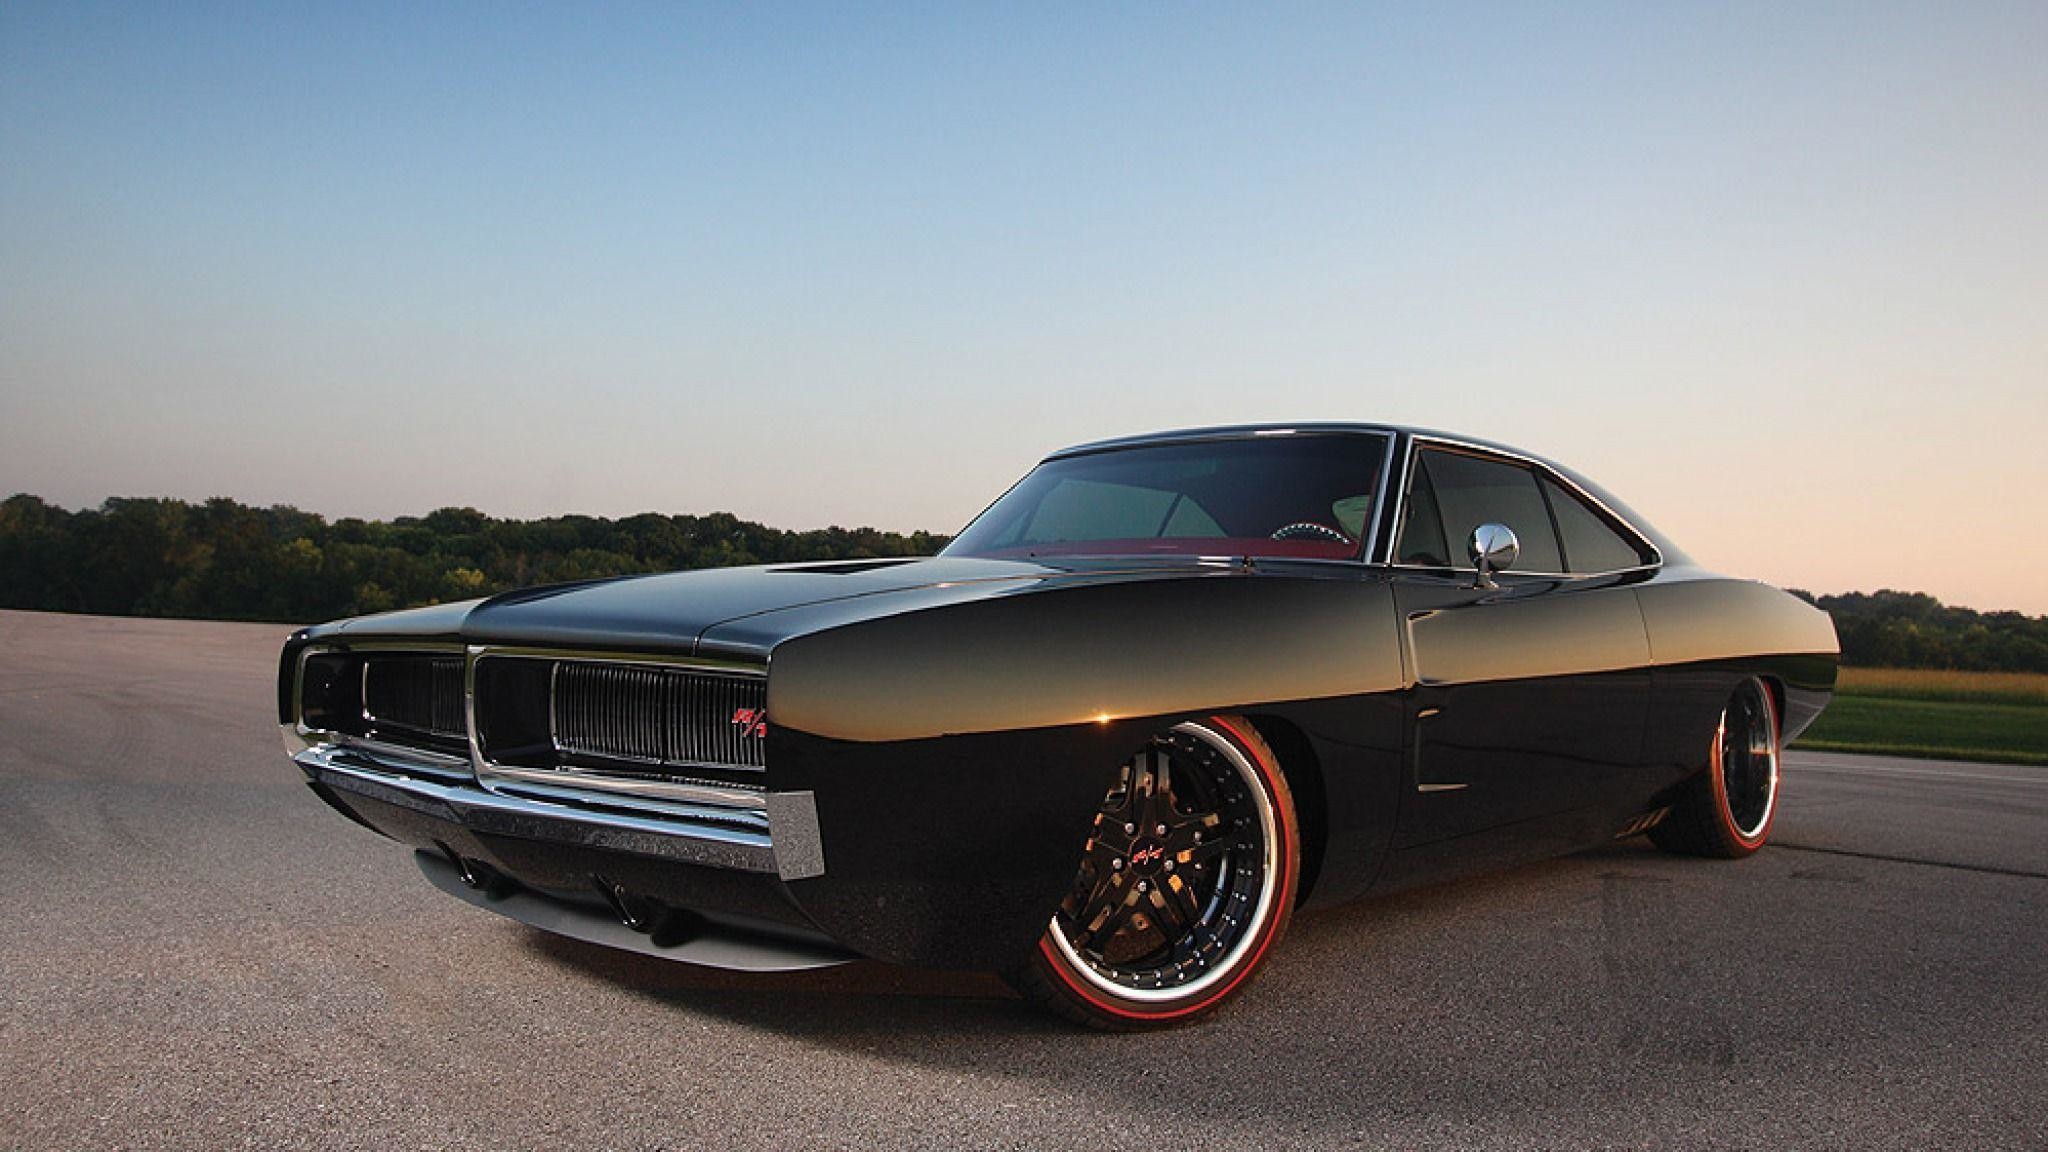 Dodge Charger Rt Wallpaper Image